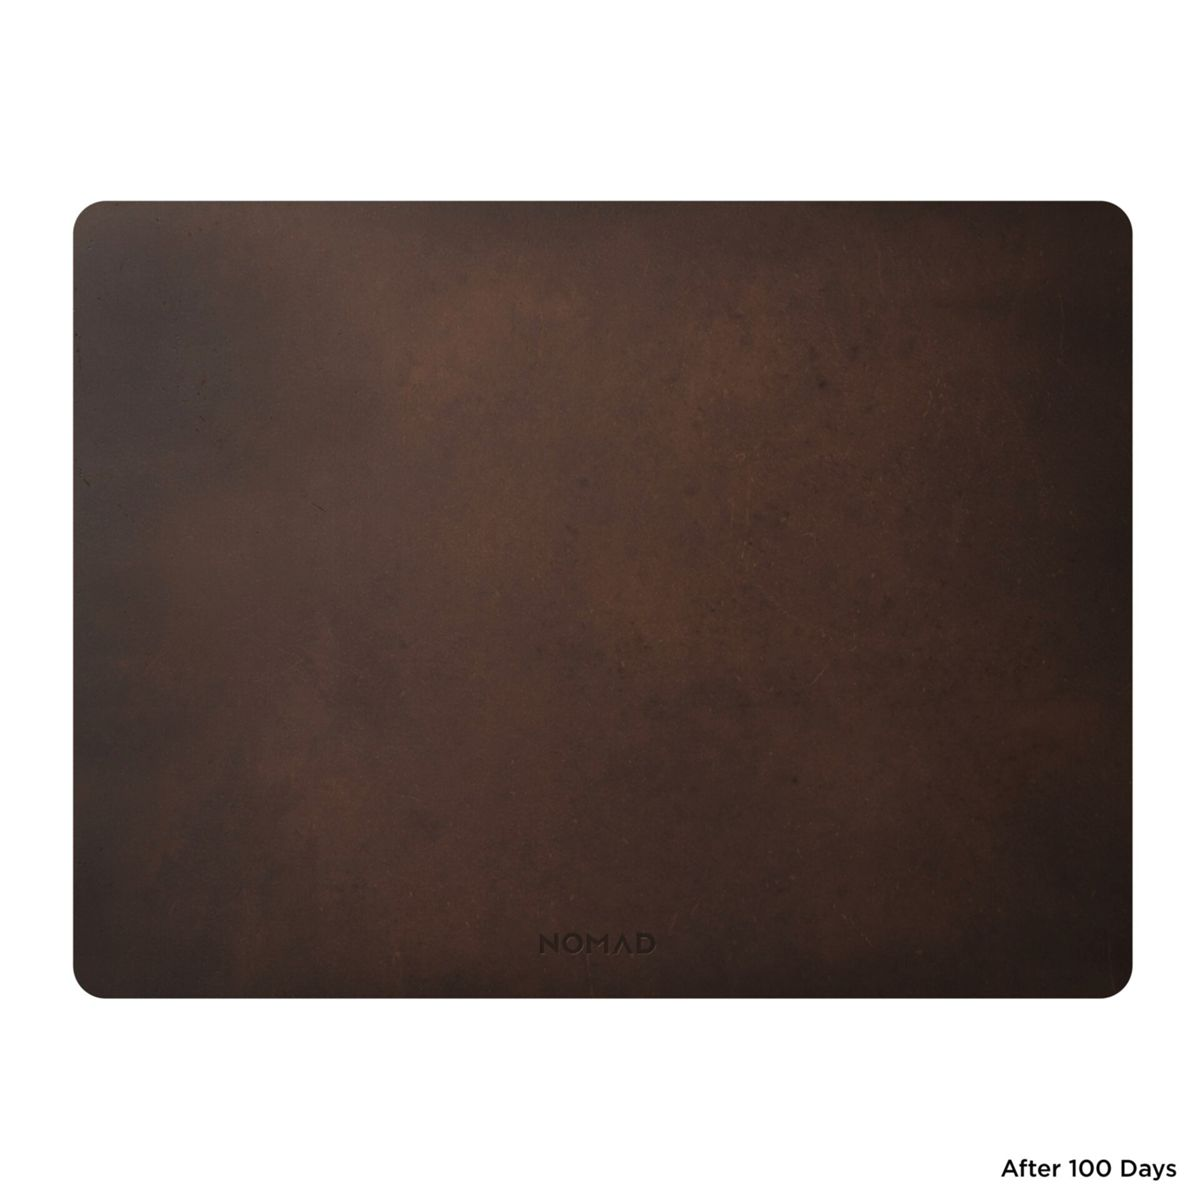 Mauspad 16-Inch, Brown Leather NOMAD Rustic Mousepad